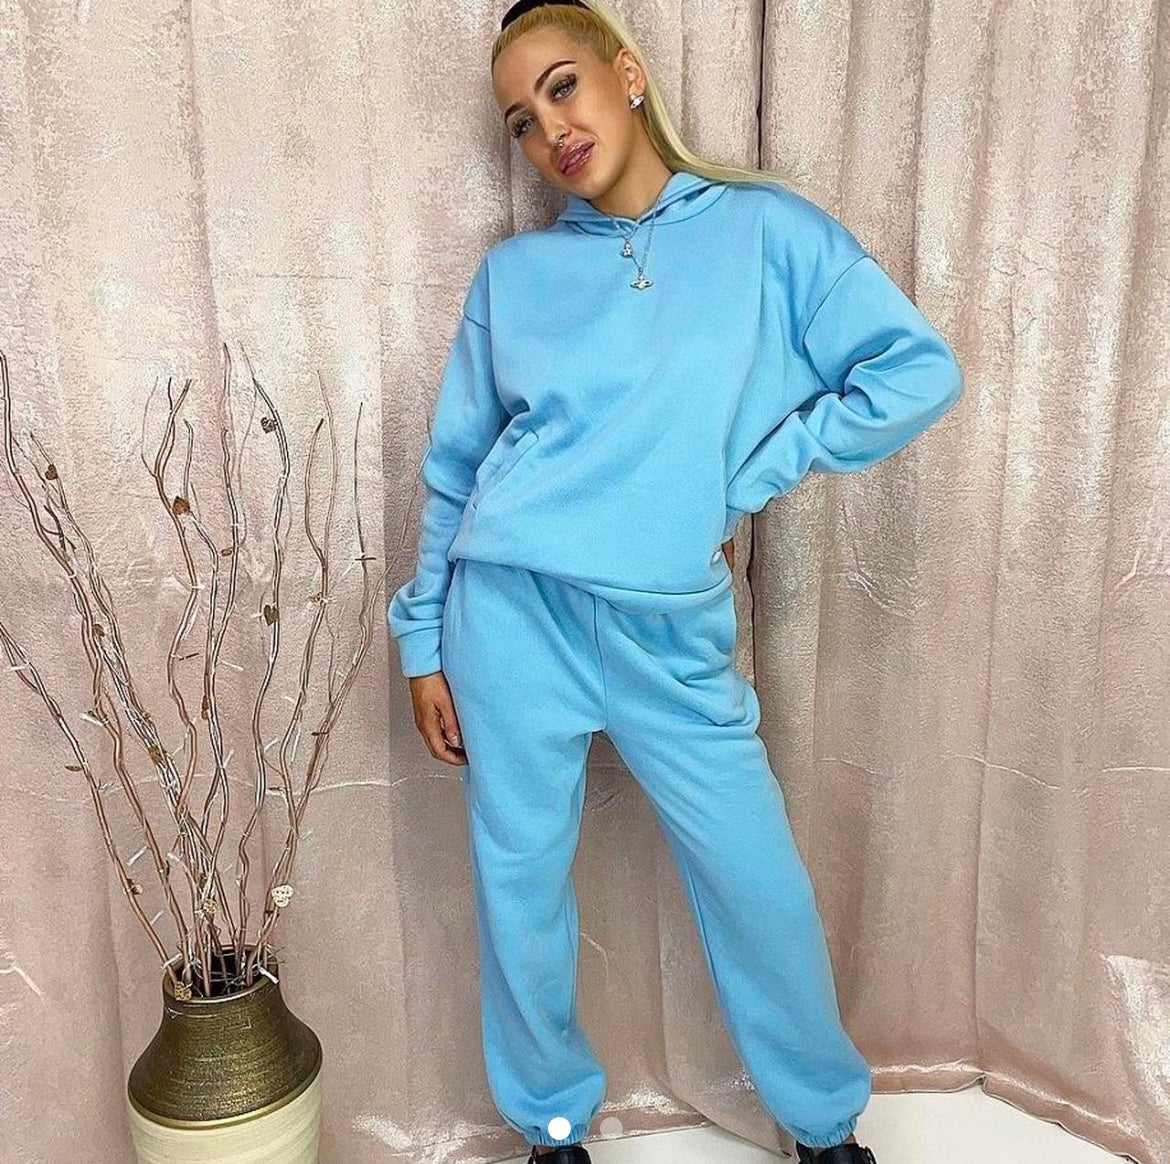 OVER SIZED BLUE TRACKSUIT, LOUNGE WEAR, COMFY TRACKSUIT